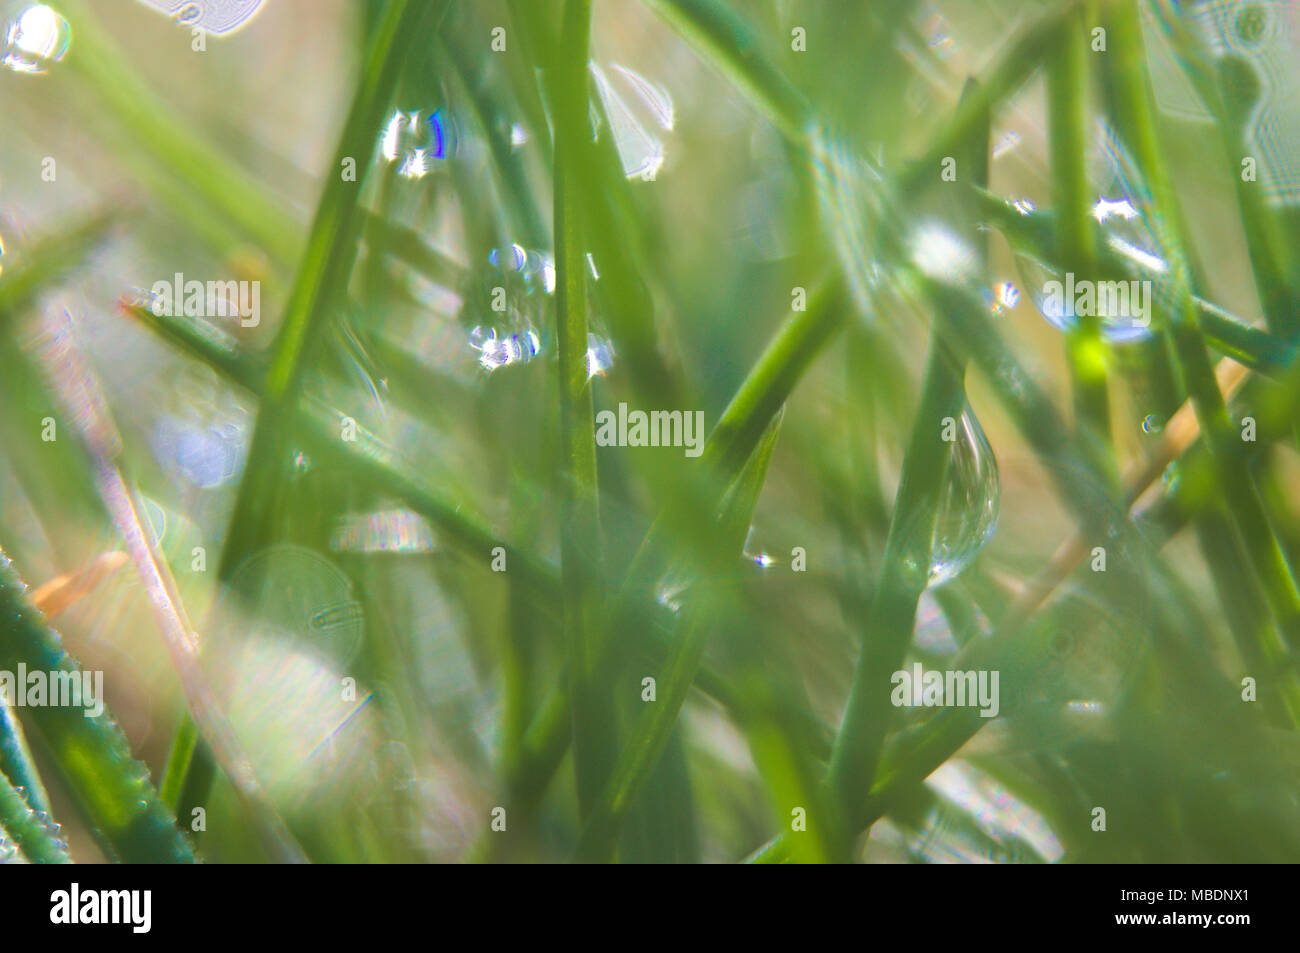 Green dewy sunlighted grass in macrophotography with small depth of field Stock Photo